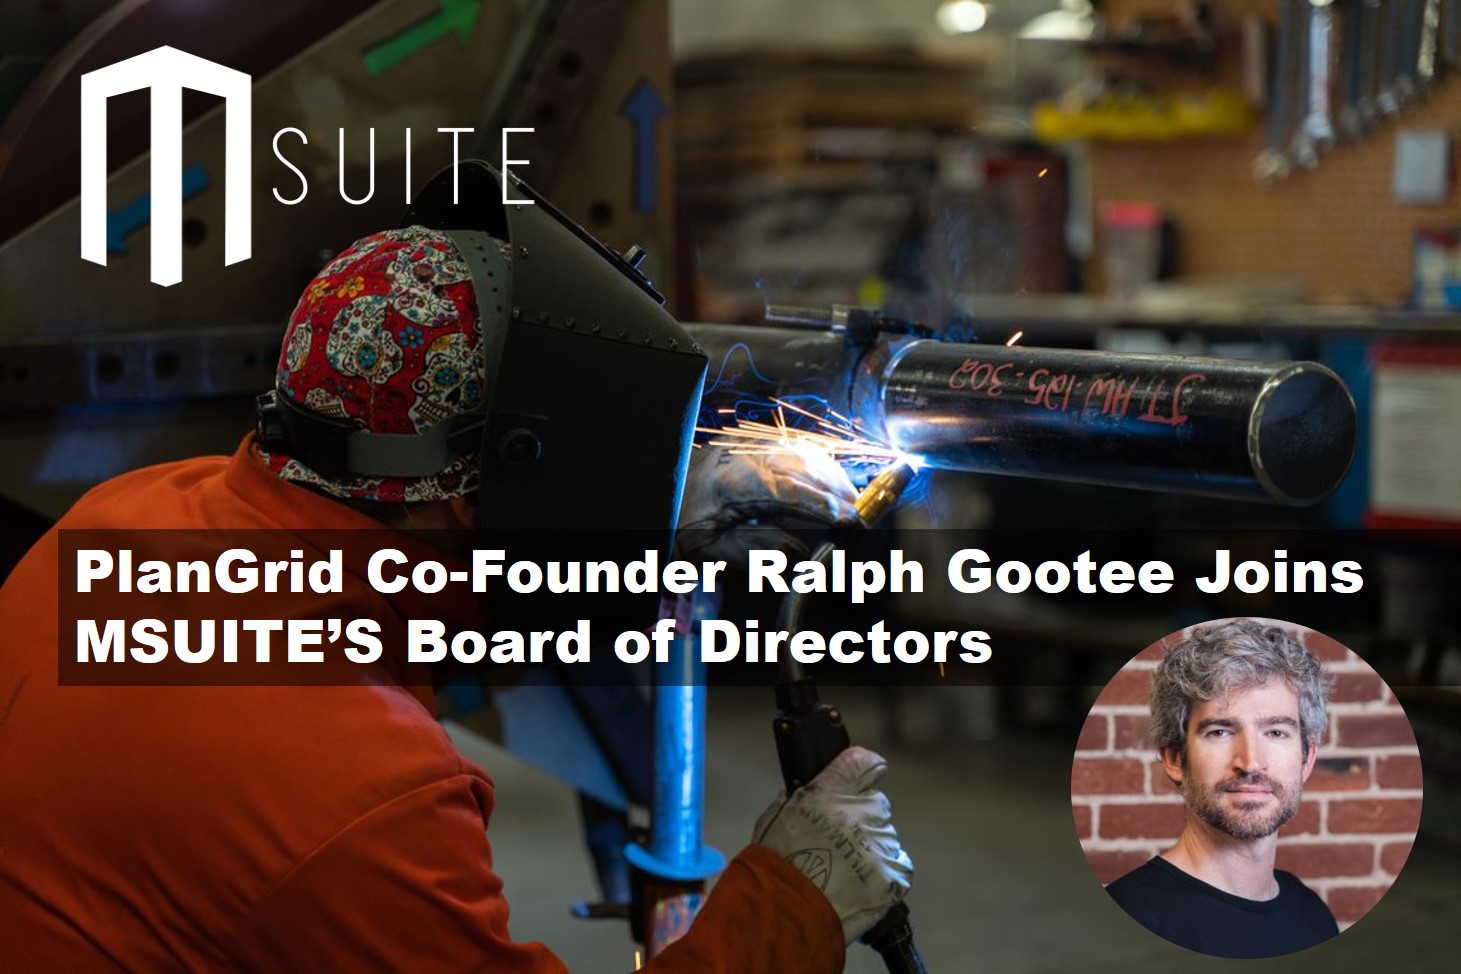 PlanGrid Co-Founder Ralph Gootee Joins MSUITE’s Board of Directors